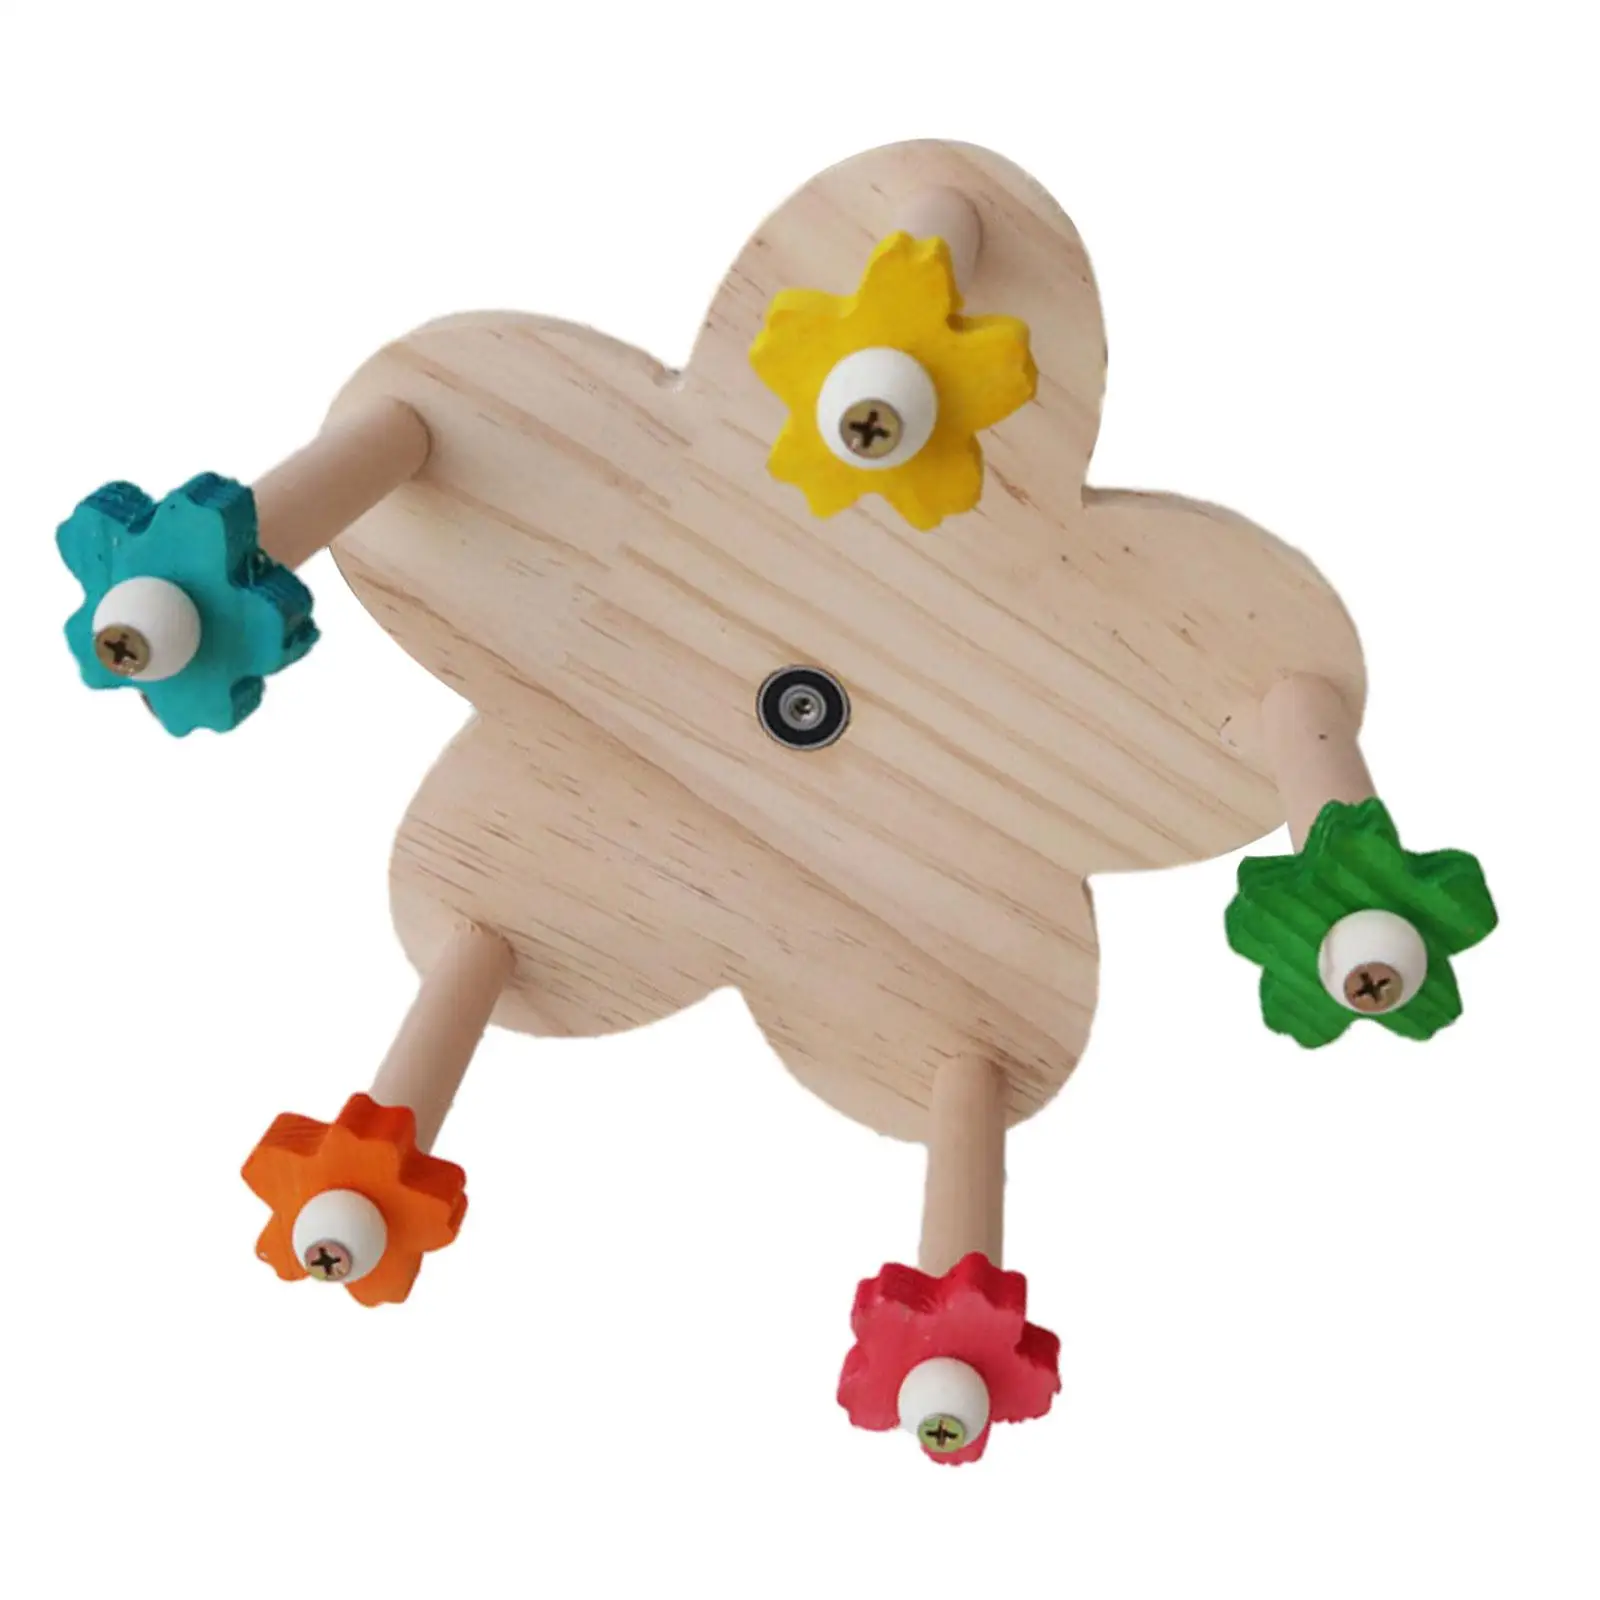 Parrot Perch Wheel Toy 20cm Diameter Wooden Rotating Perches Toys for Macaws Budgies Parakeet Parrot Budgerigar Cockatiels